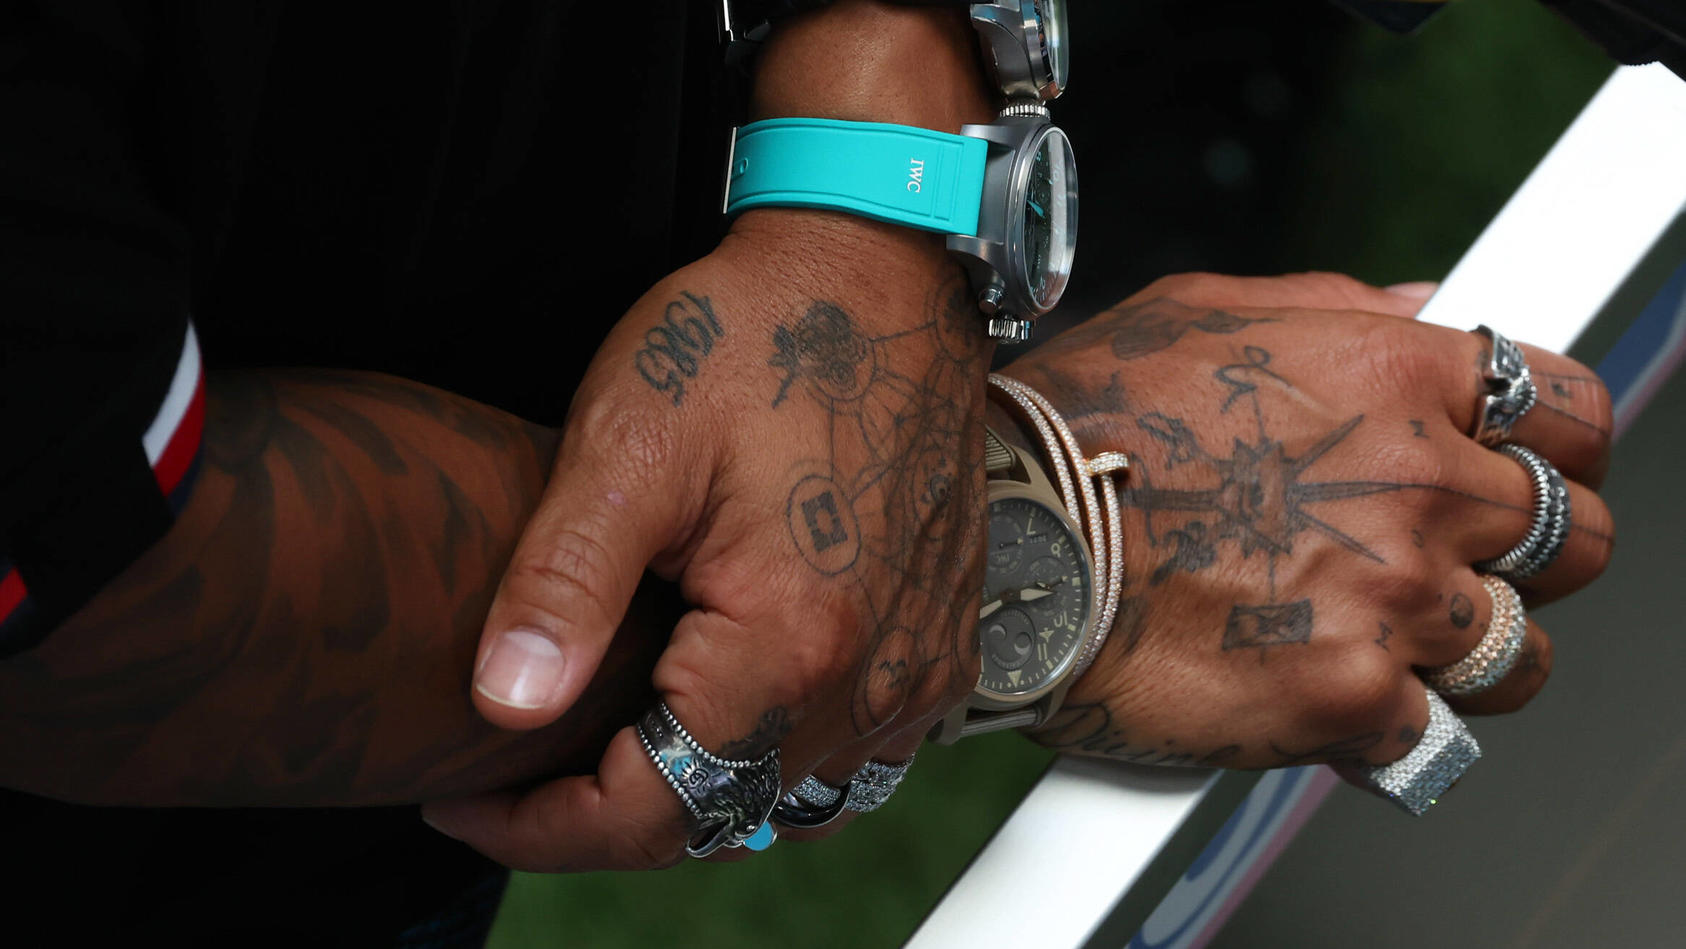  Formula 1 2022: Miami GP MIAMI INTERNATIONAL AUTODROME, UNITED STATES OF AMERICA - MAY 06: The tattoos and jewellery of Sir Lewis Hamilton, Mercedes-AMG during the Miami GP at Miami International Autodrome on Friday May 06, 2022 in Miami, United Sta